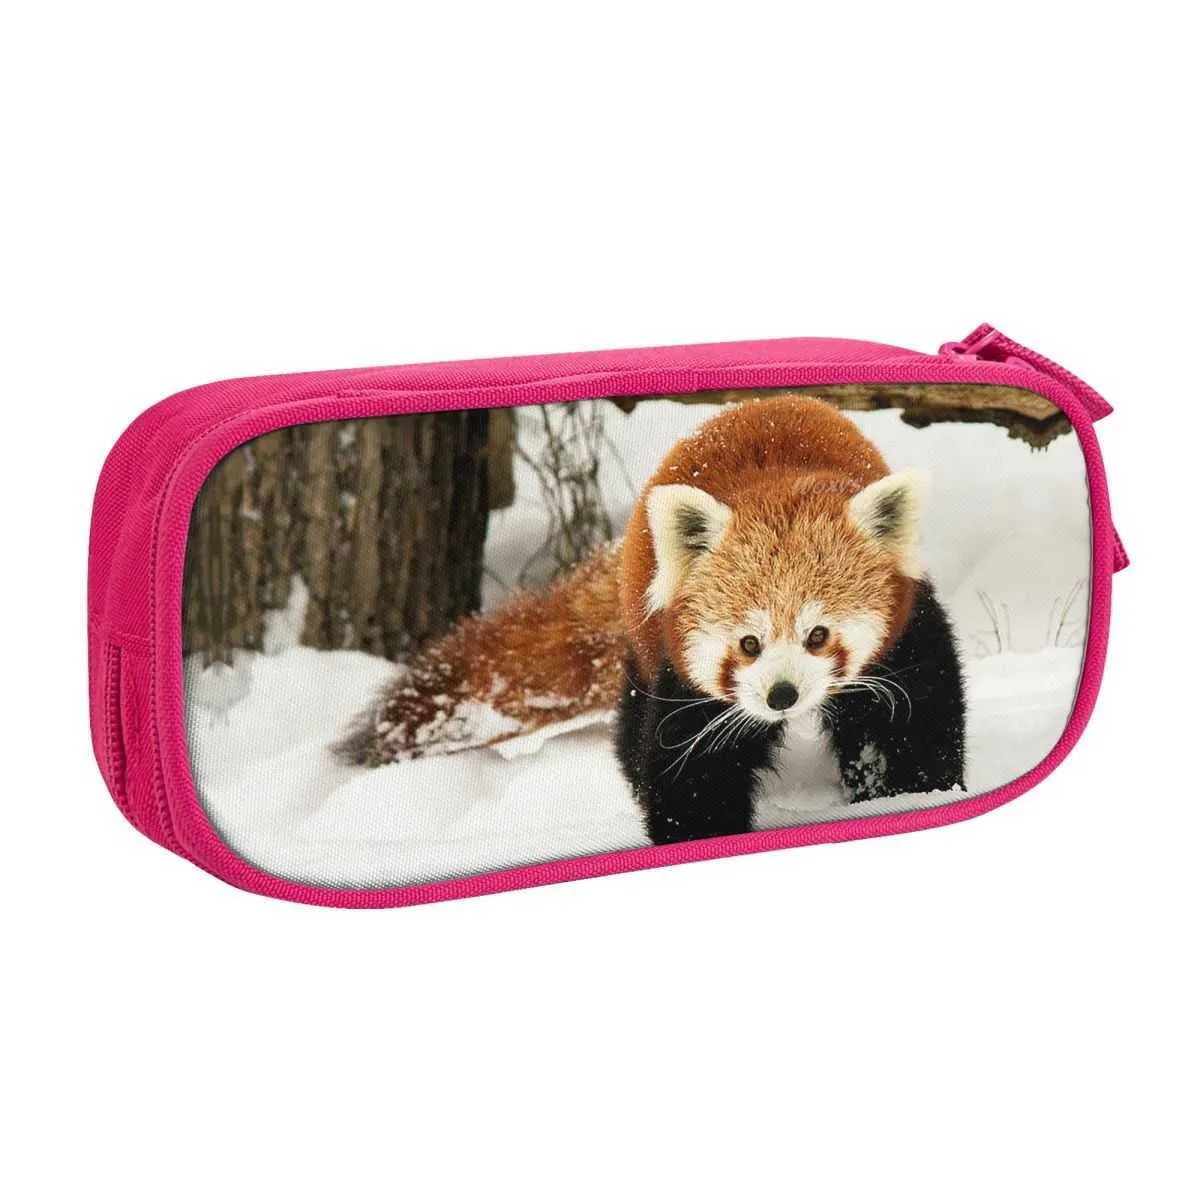 Snow And You Red Panda Pencil Case Cute Animal Pen Holder Bag For Kids With  Big Capacity And Zipper Ideal For School Supplies And Math Toys For  Preschoolers R230822 From Dafu05, $8.92